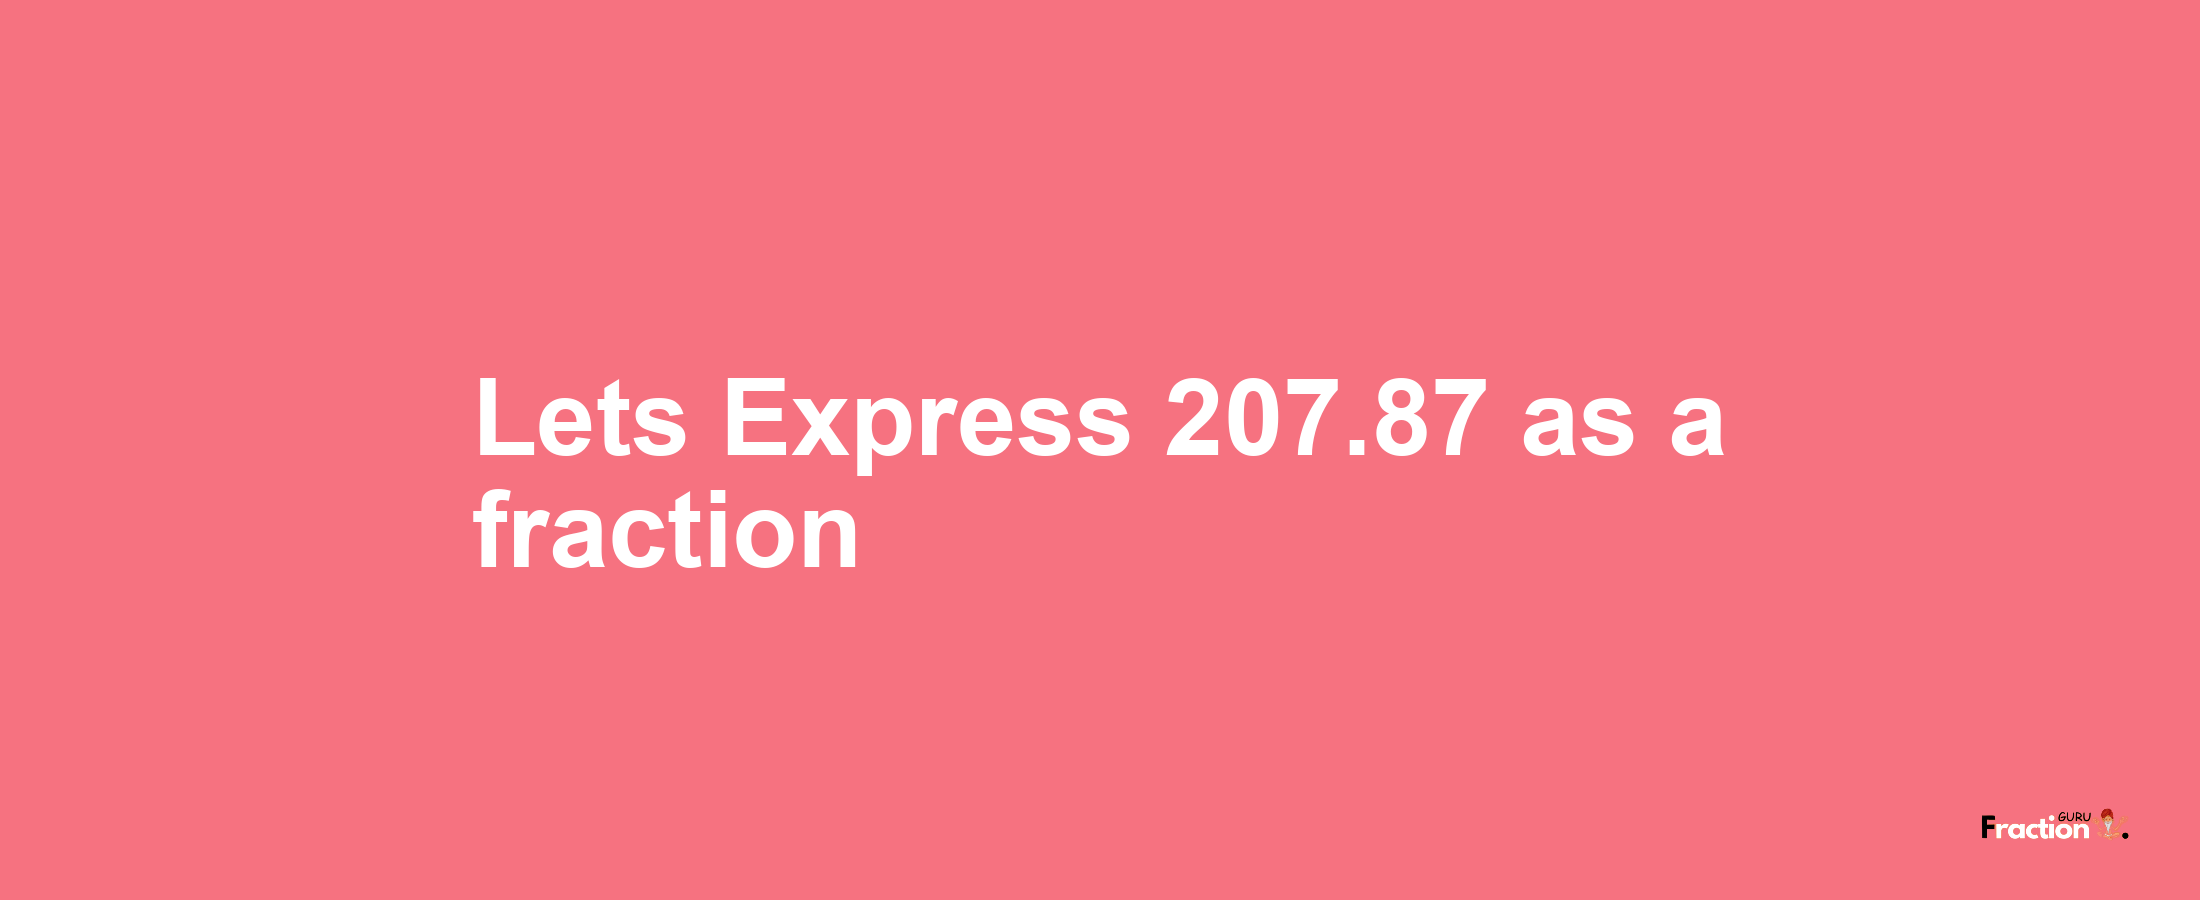 Lets Express 207.87 as afraction